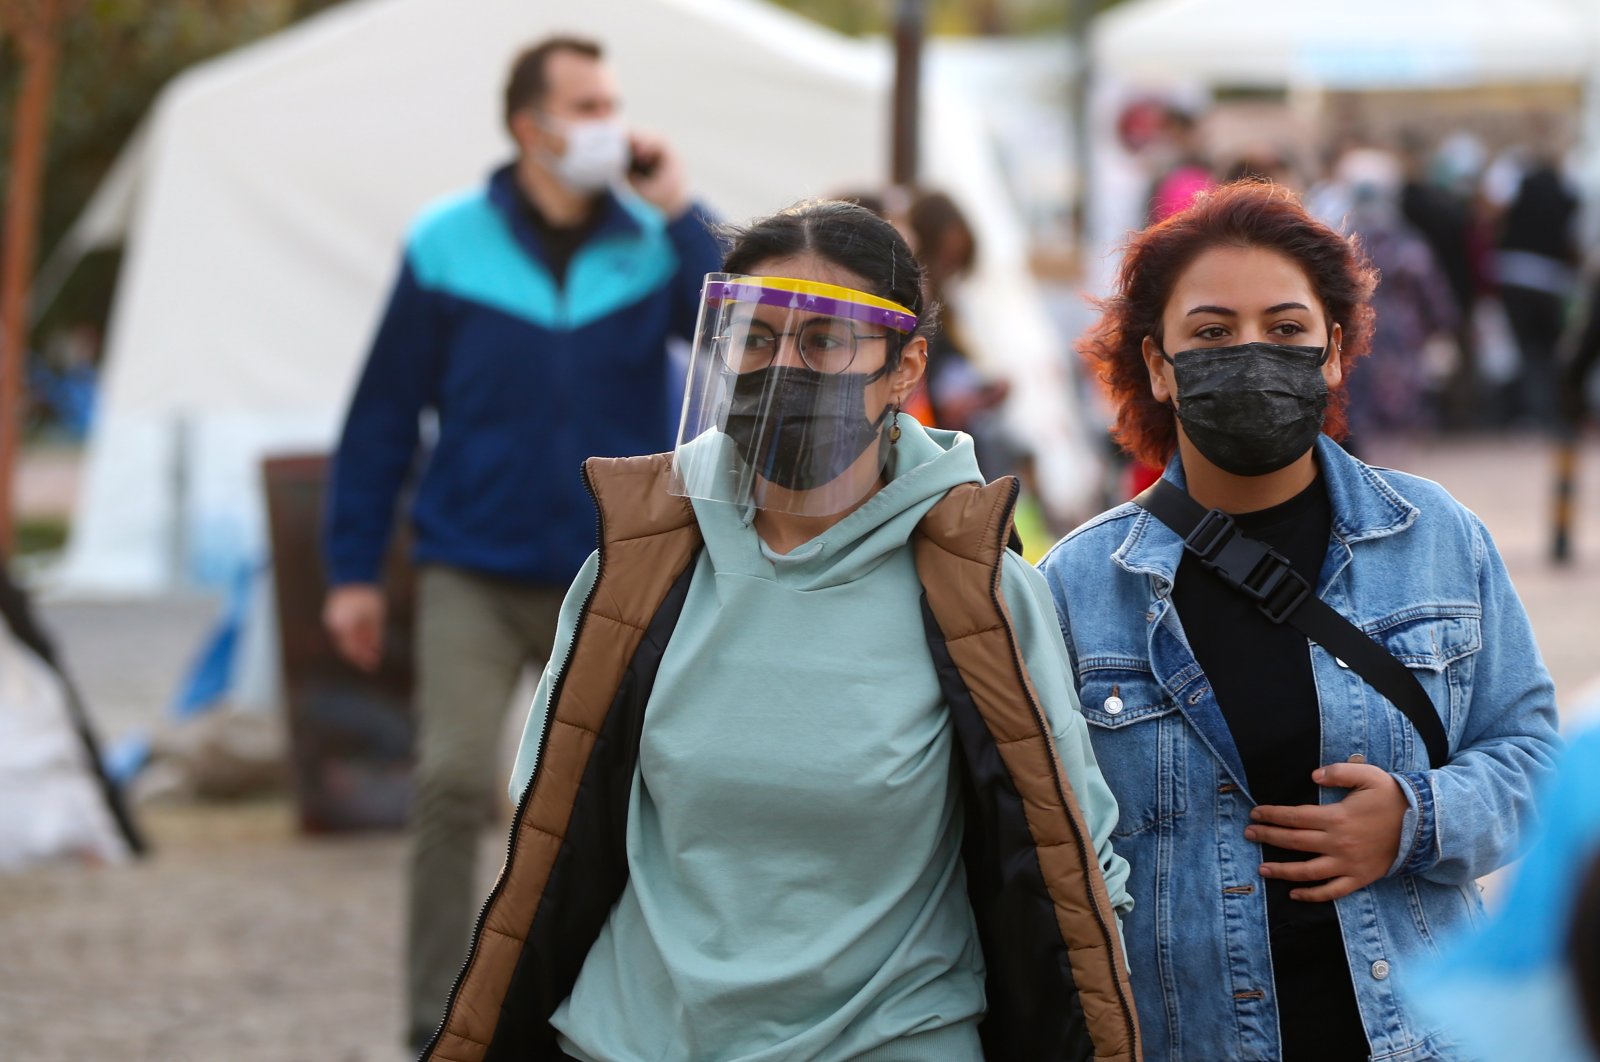 Two young women donning face masks and shields walk at a tent city in the western city of Izmir, which was hit by an earthquake on Oct. 30, 2020 killing 114 people and injured hundreds more, leaving thousands homeless or in search of more secure buildings, on Nov. 7, 2020. (AA Photo)